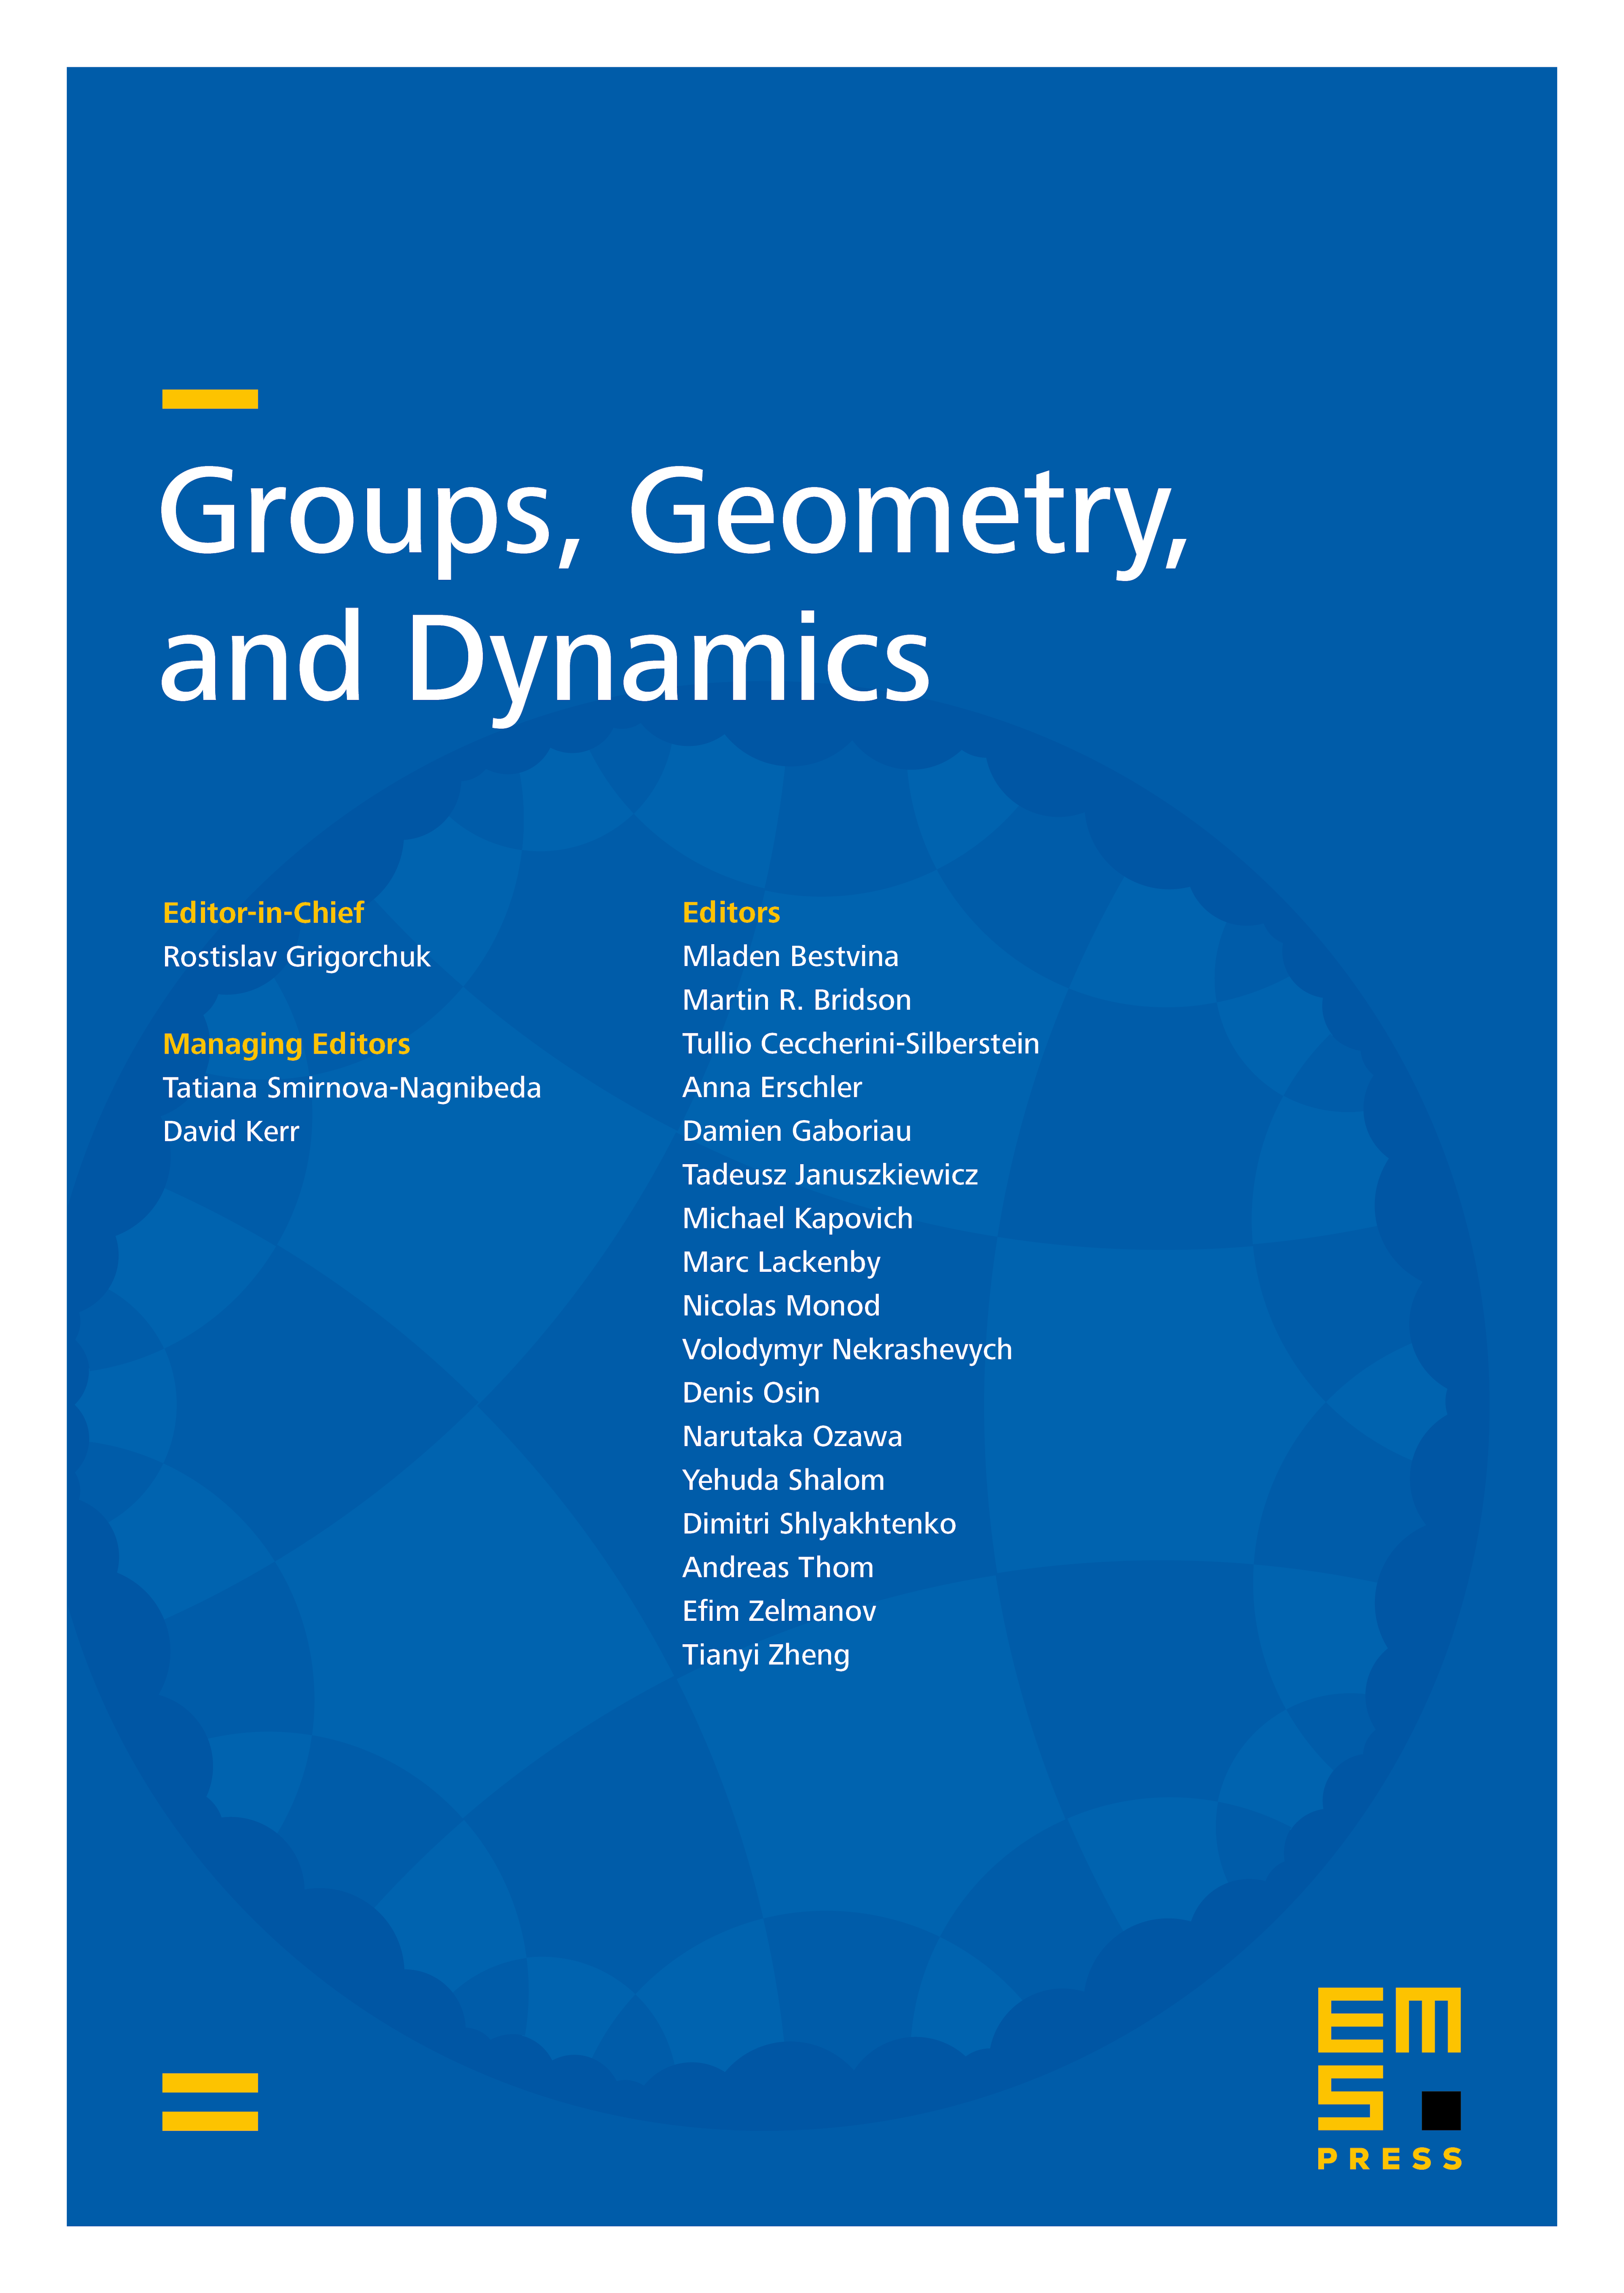 Automorphisms of partially commutative groups I: Linear subgroups cover